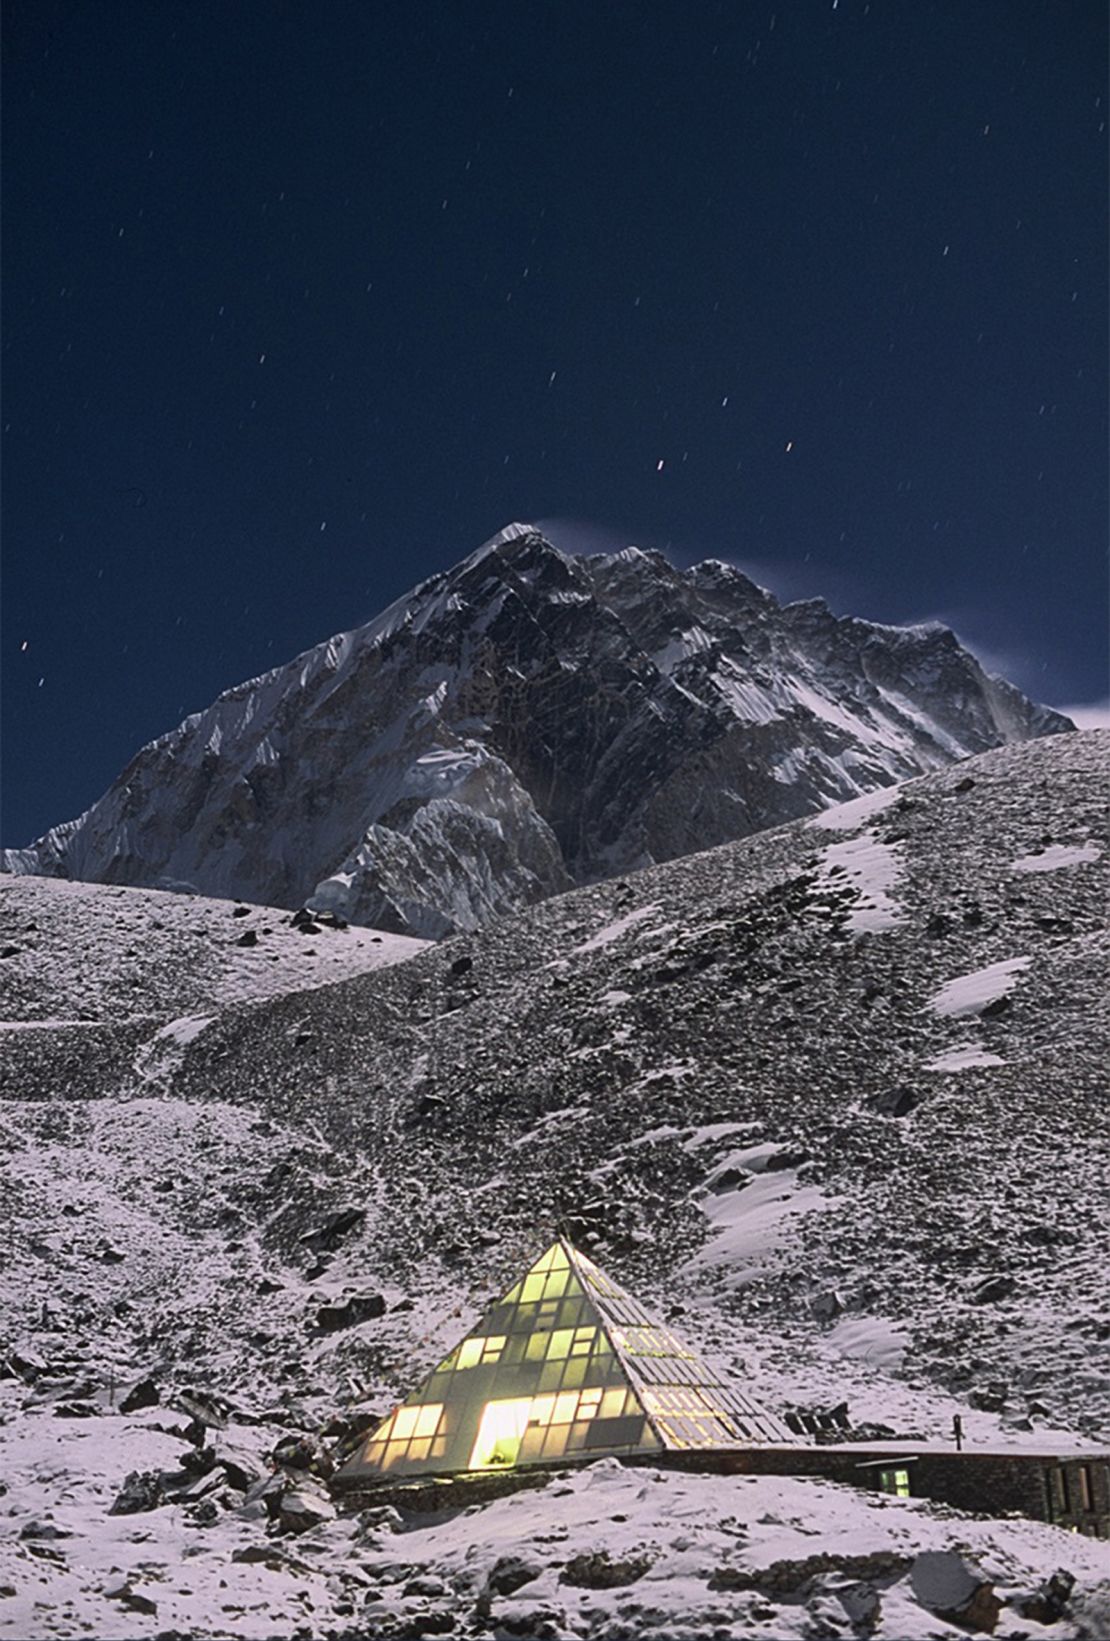 Image at night. The Pyramid Observatory at night. The Pyramid International Laboratory/Observatory climate station has recorded hourly meteorological data for nearly three decades. These data were used by researchers of the Institute of Science and Technology Austria (ISTA). The Pumori Peak (Nepal) is seen in the background. Credit: Franco Salerno